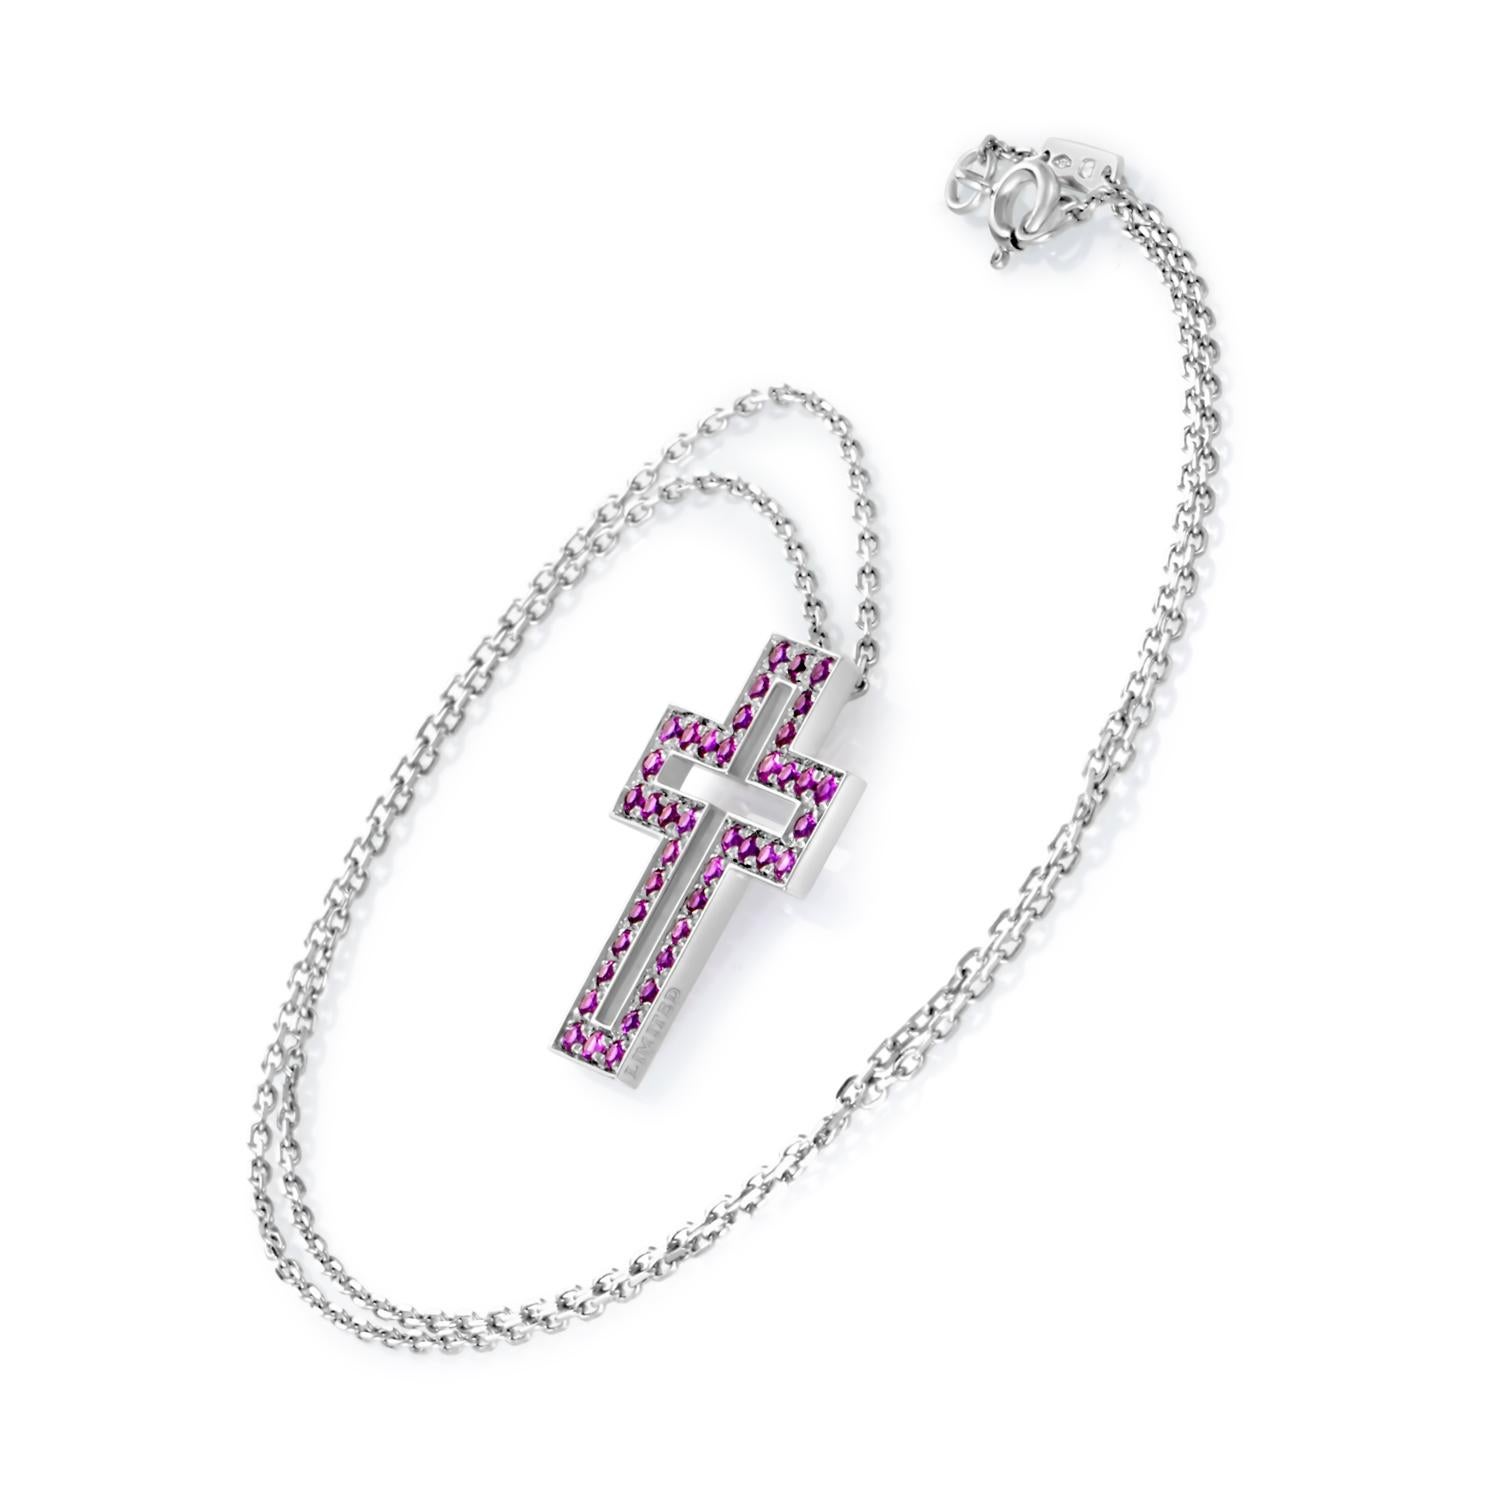 Set in an elegant pendant that assumes the impressive form of a cross, charming rubies in this splendid necklace from Boucheron are perfectly emphasized by the shimmering 18K white gold backdrop.
